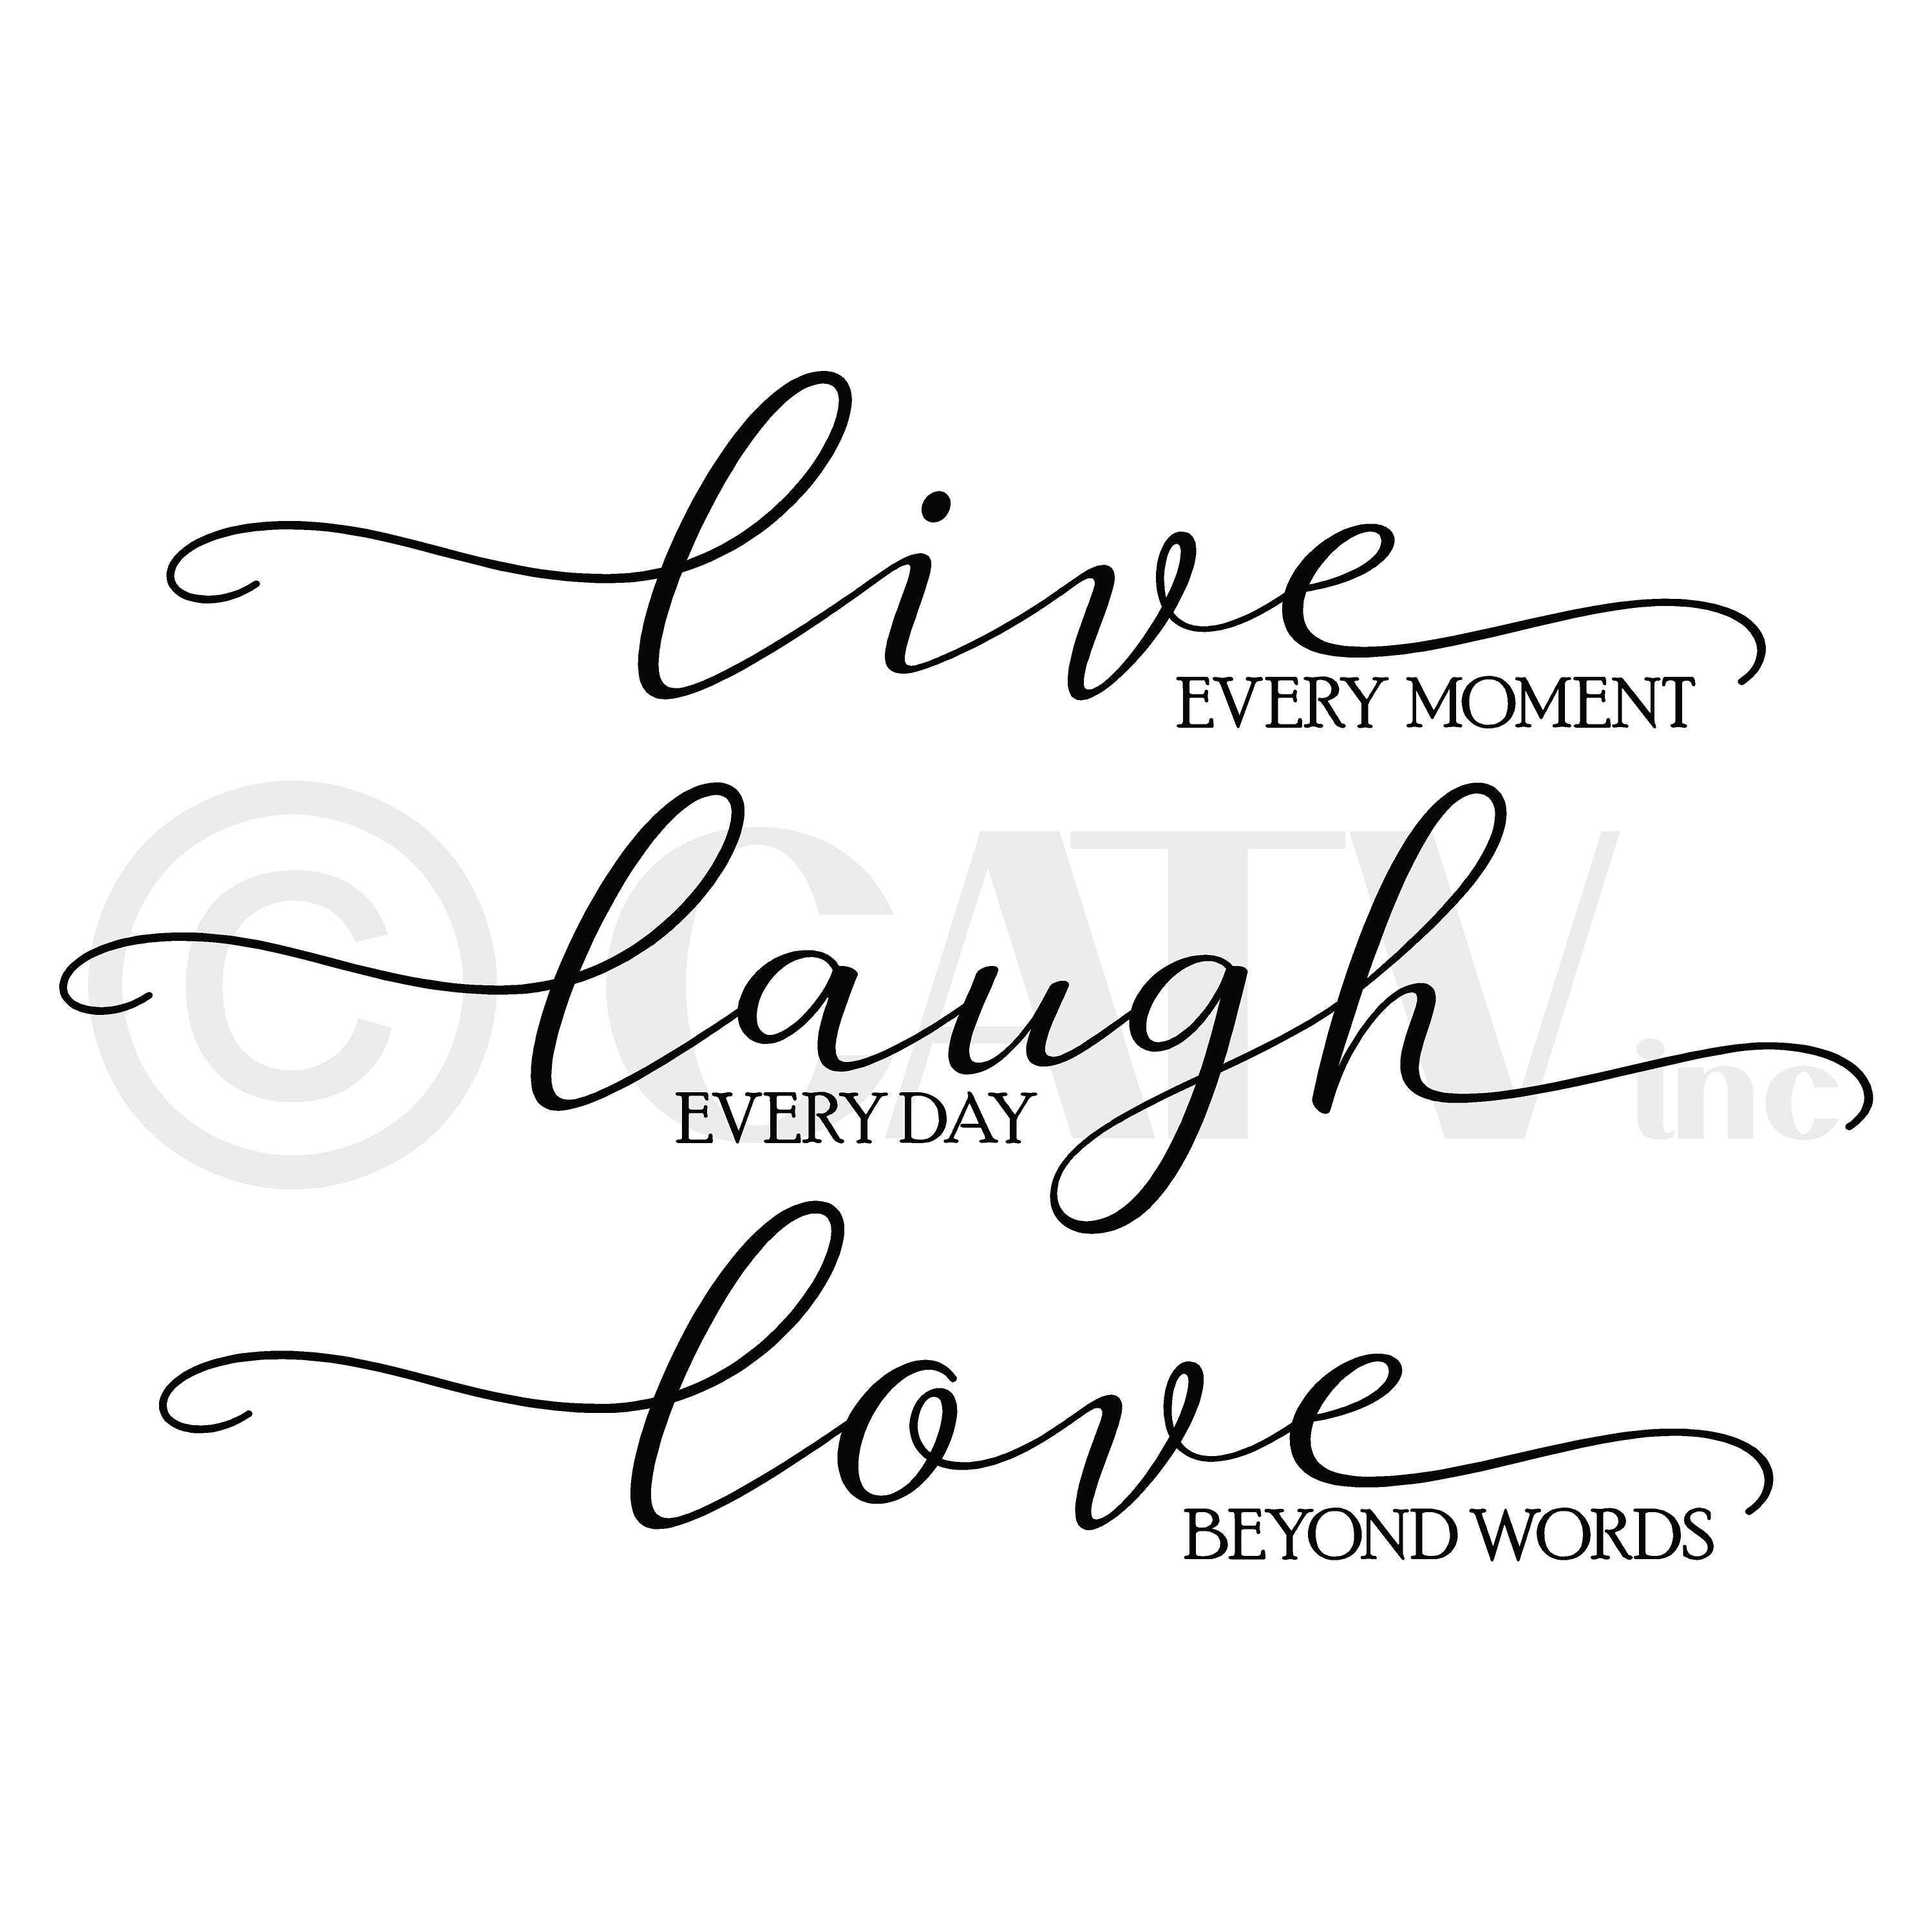 Every Moment Lettering Live Decal Love Everyday - Words Wall large Laugh Sticker Etsy Beyond Vinyl